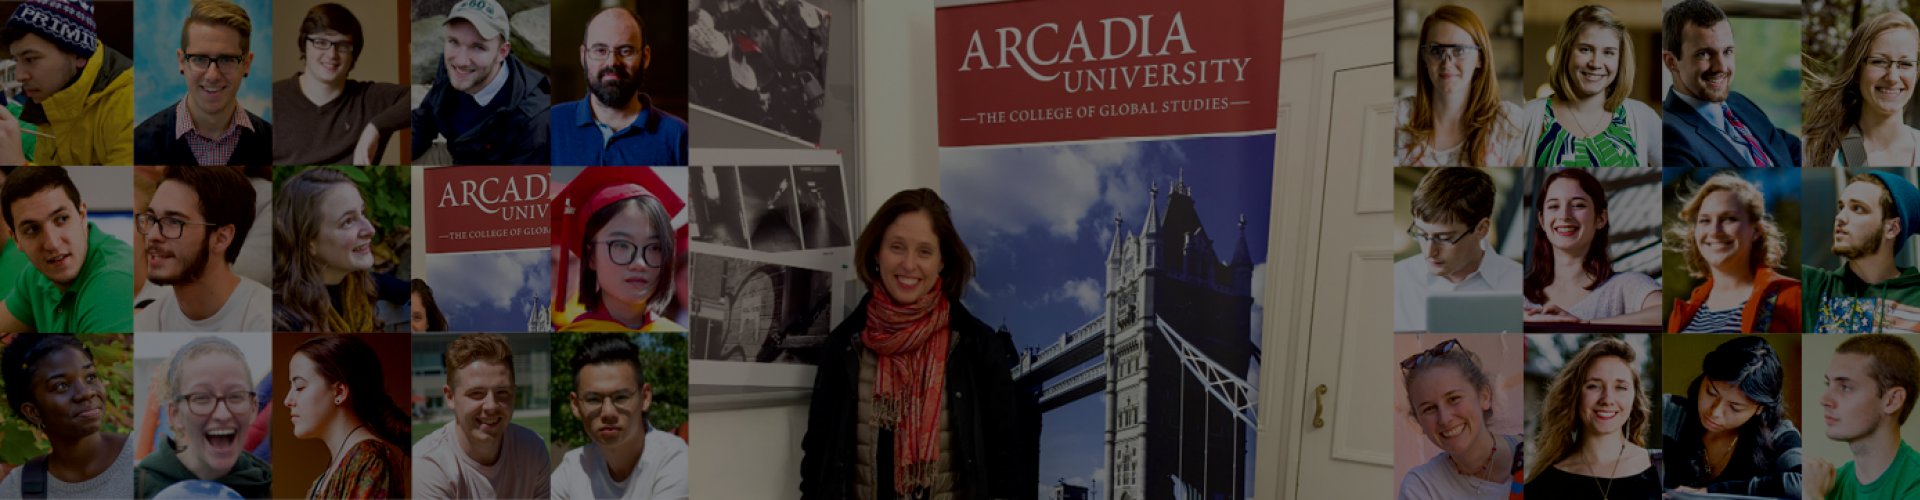 Louise Burns in front of a banner for Arcadia's College of Global Studies.